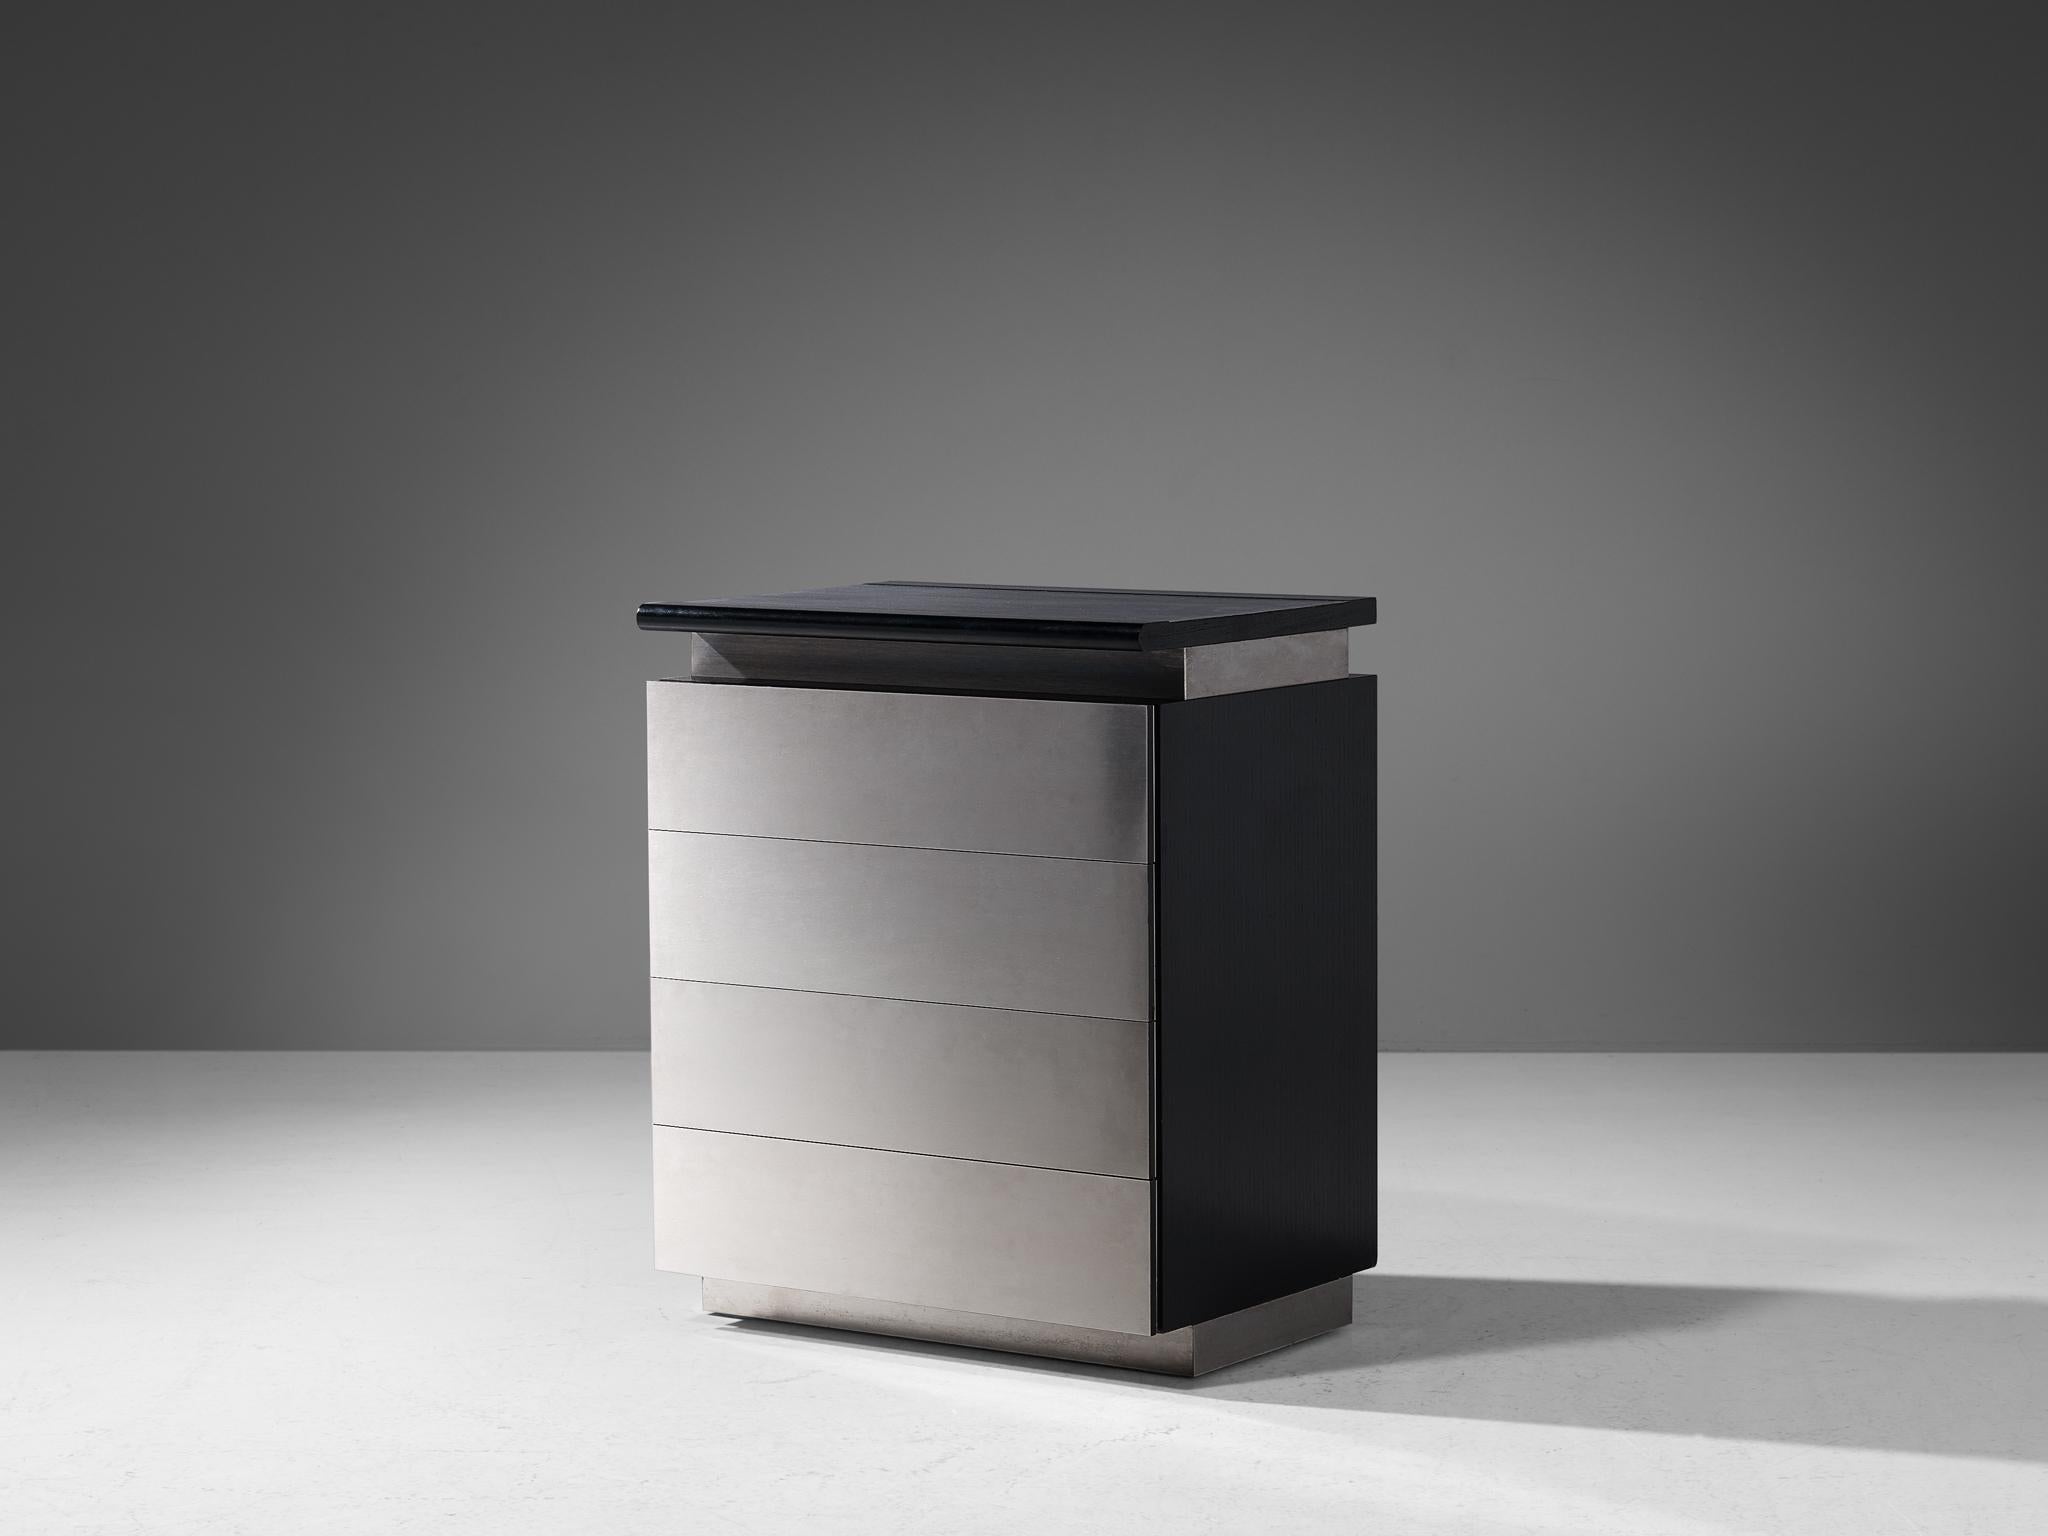 Lodovico Acerbis for Acerbis, chest of drawers, lacquered oak, brushed aluminum, Italy, 1970s

This sleek and modern chest of drawers in stainless steel and lacquered oak is designed by Lodocivo Acerbis for Acerbis in the 1970s. This cabinet has